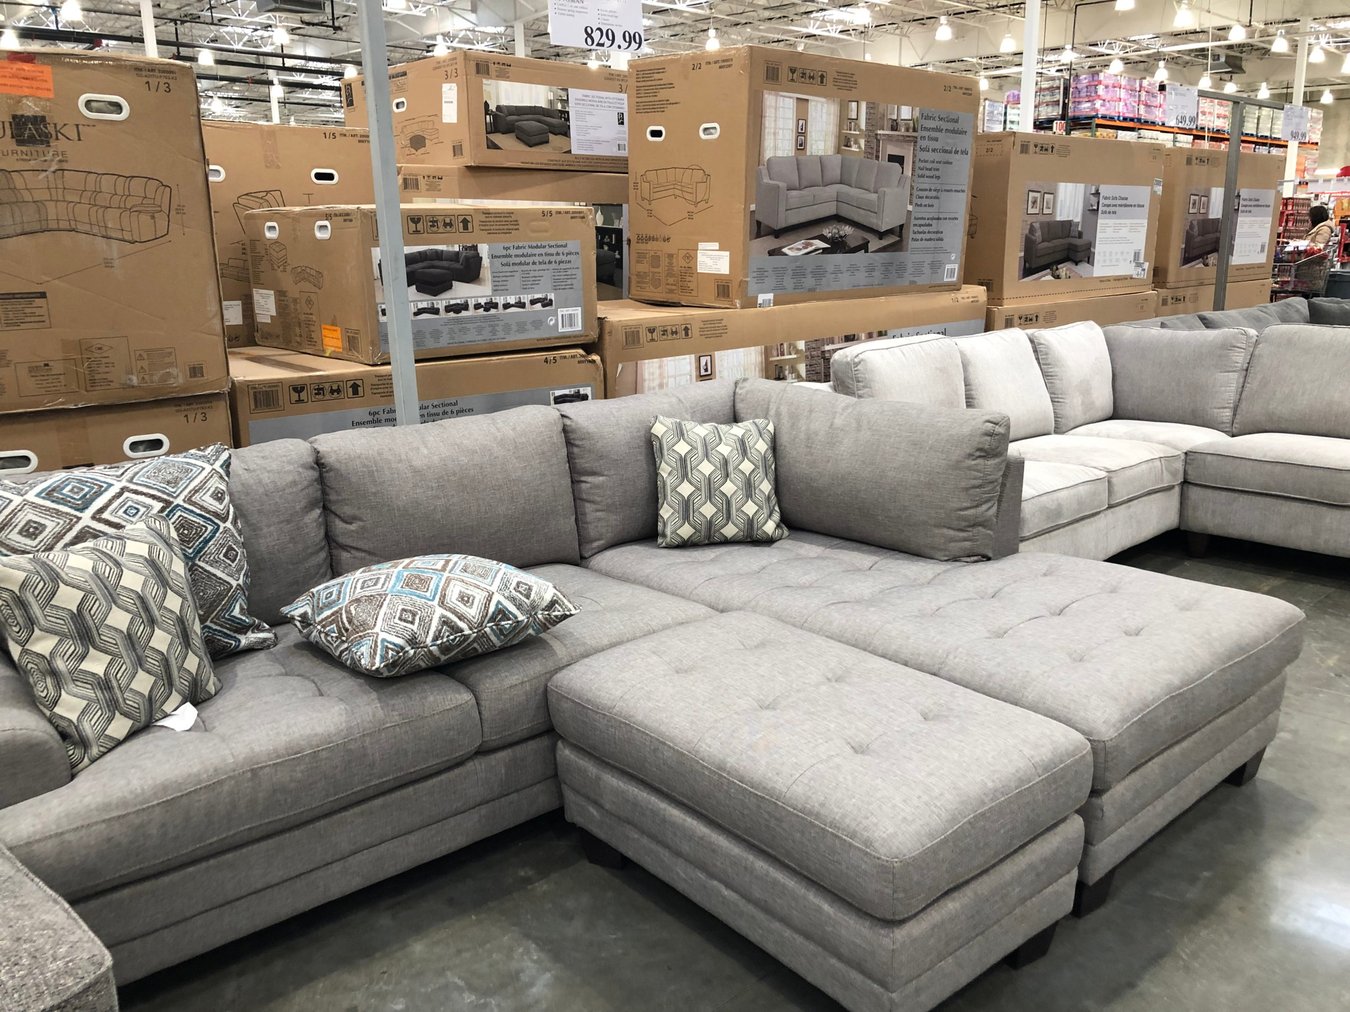 10 Items Your Costco Might Run Out of